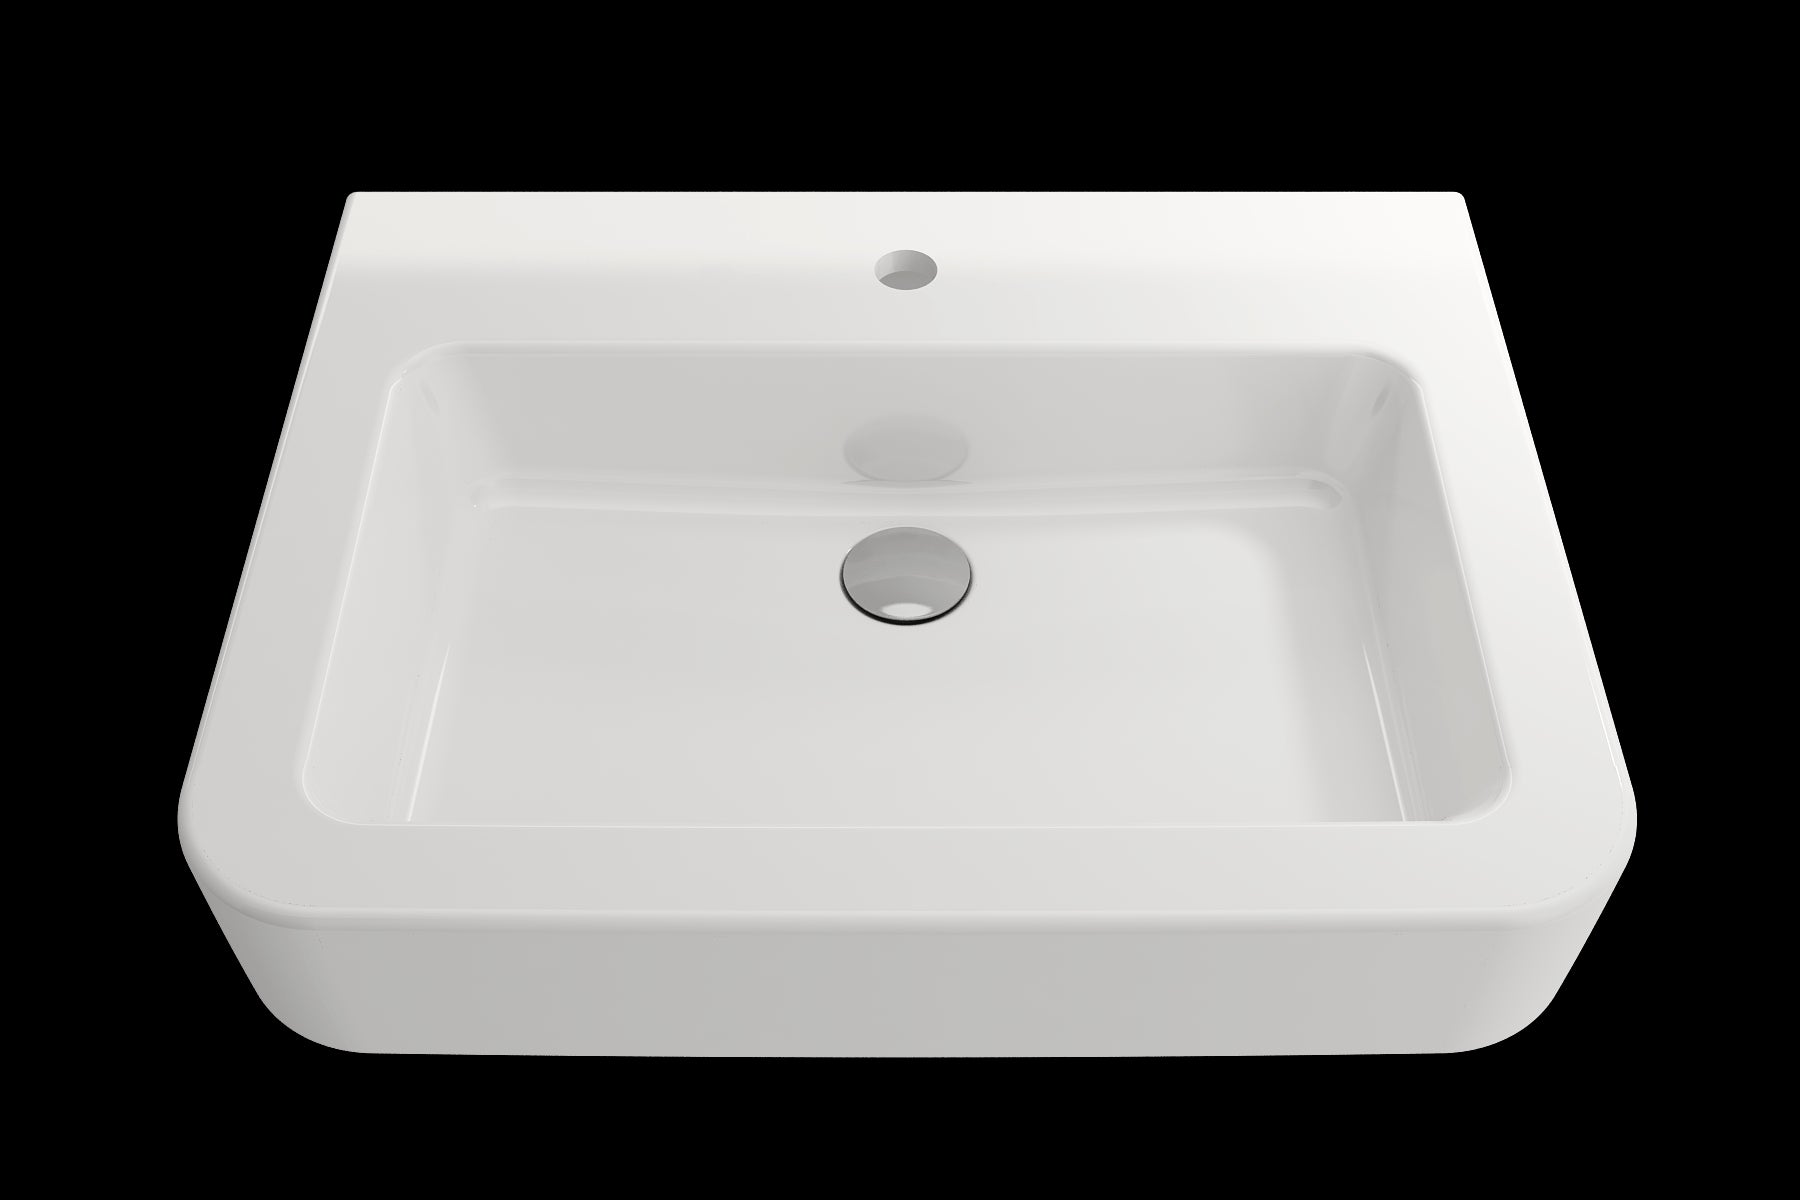 BOCCHI PARMA 25.5" Wall-Mounted Sink Fireclay 1-Hole With Overflow